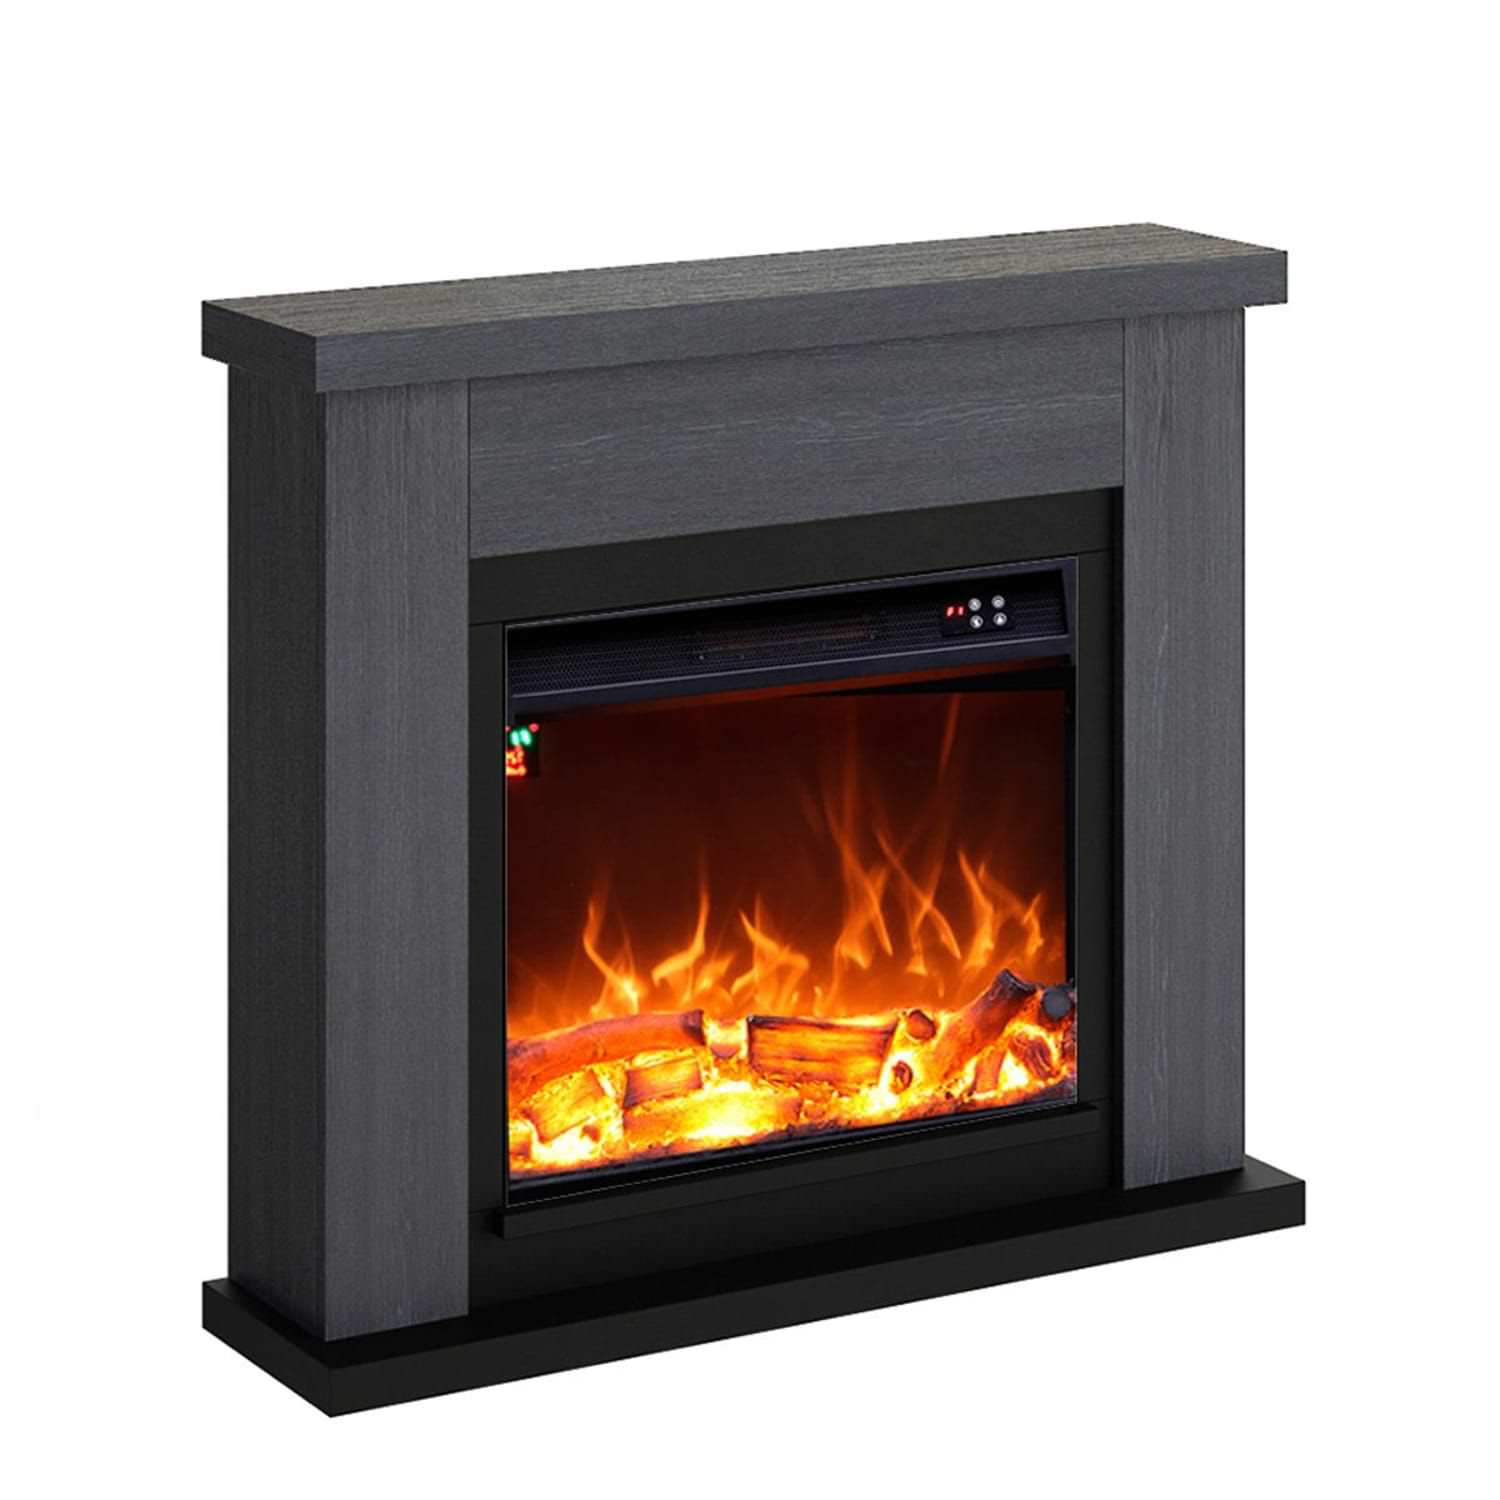 Paologris Complete Electric Fireplace